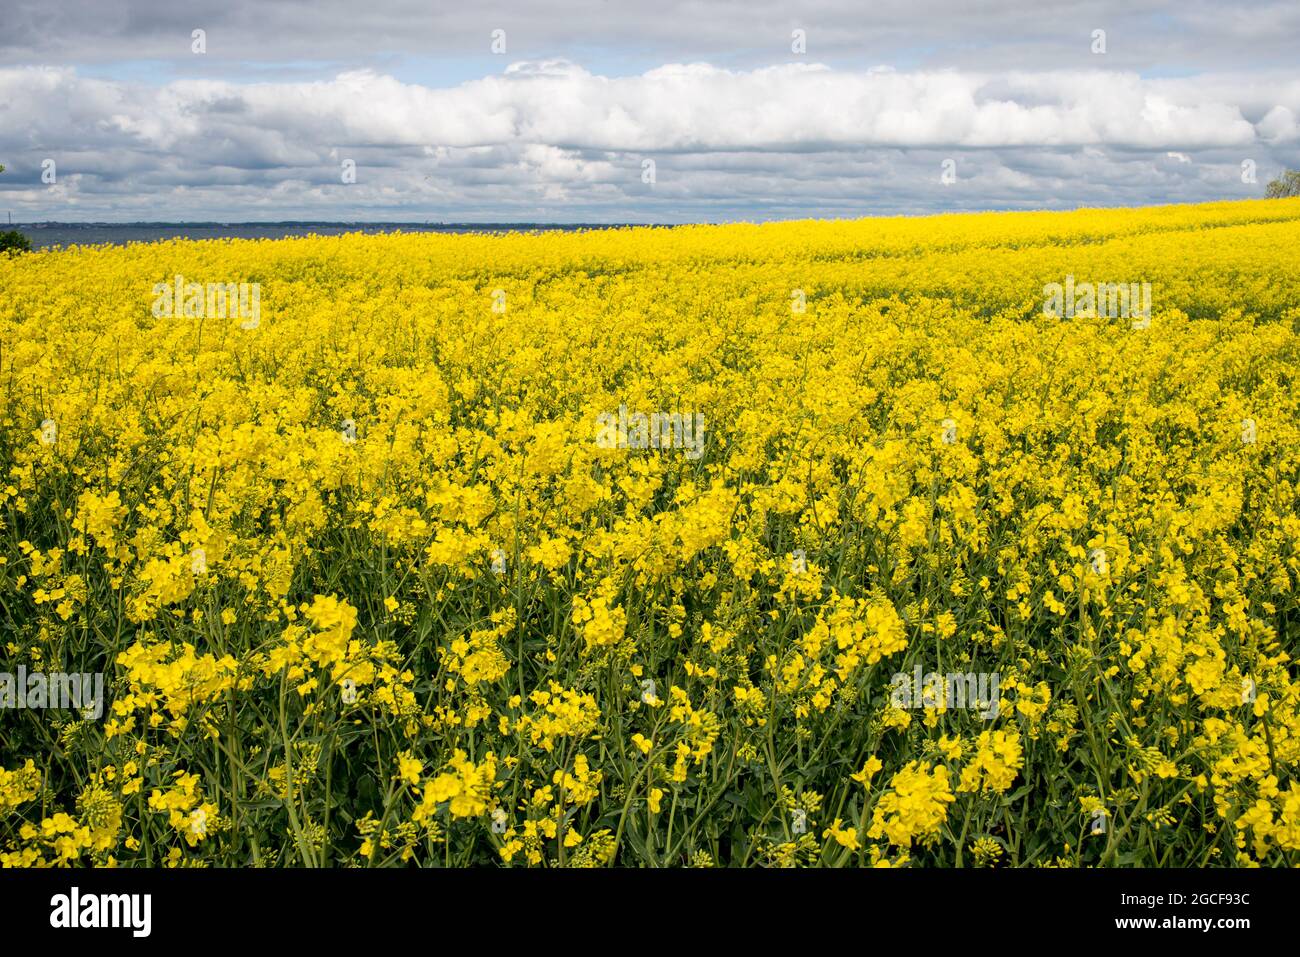 Beautiful landscape on the island Ven in the Øresund between Denmark and Sweden in May with a field of yellow rapeseed flowers Stock Photo